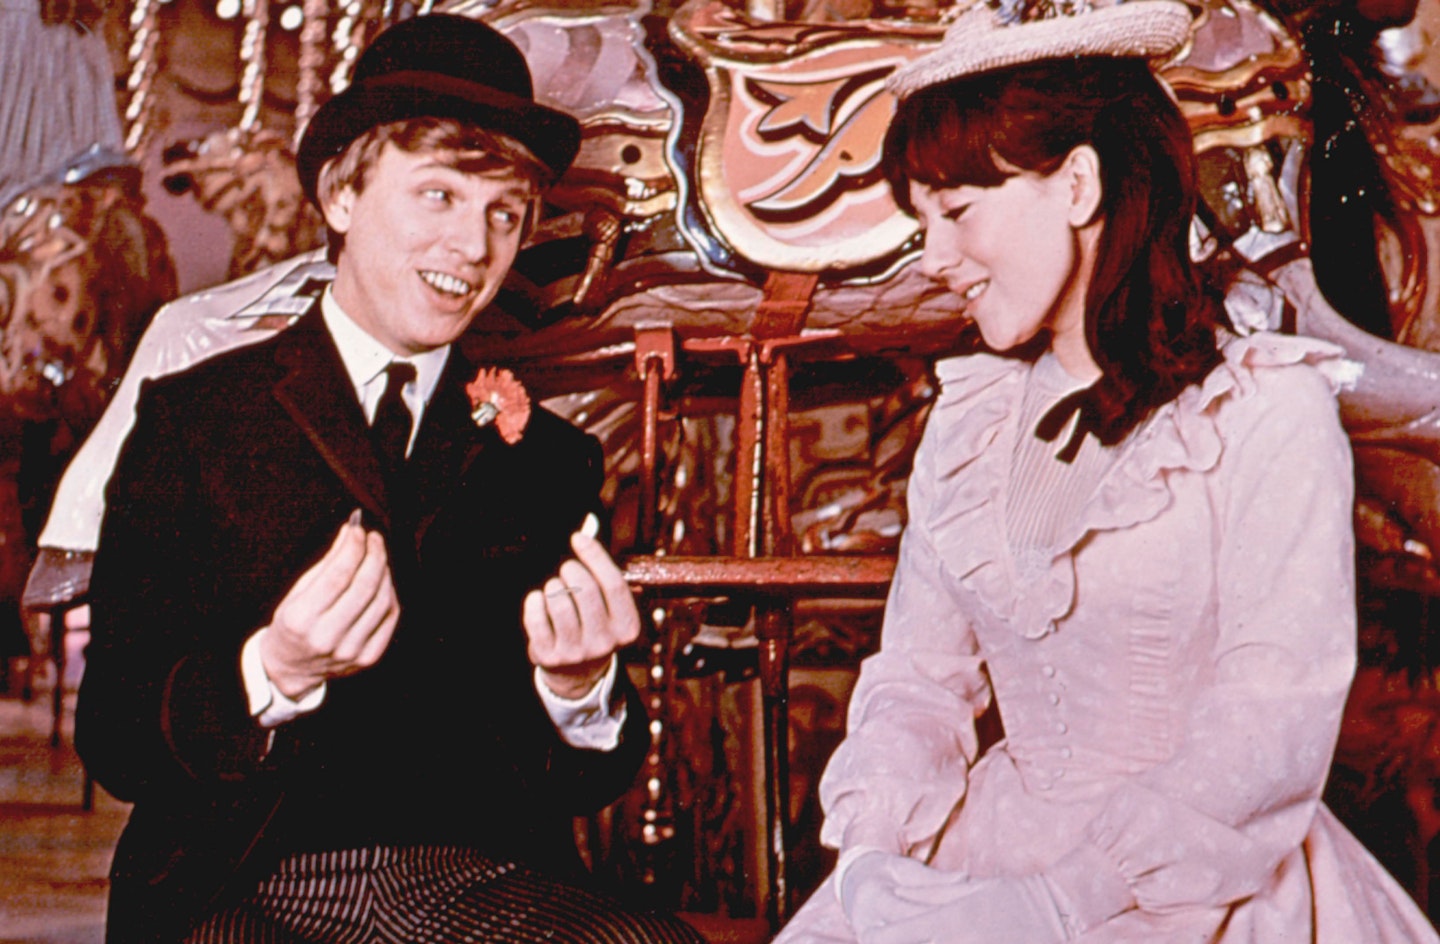 Julia Foster and Tommy Steele